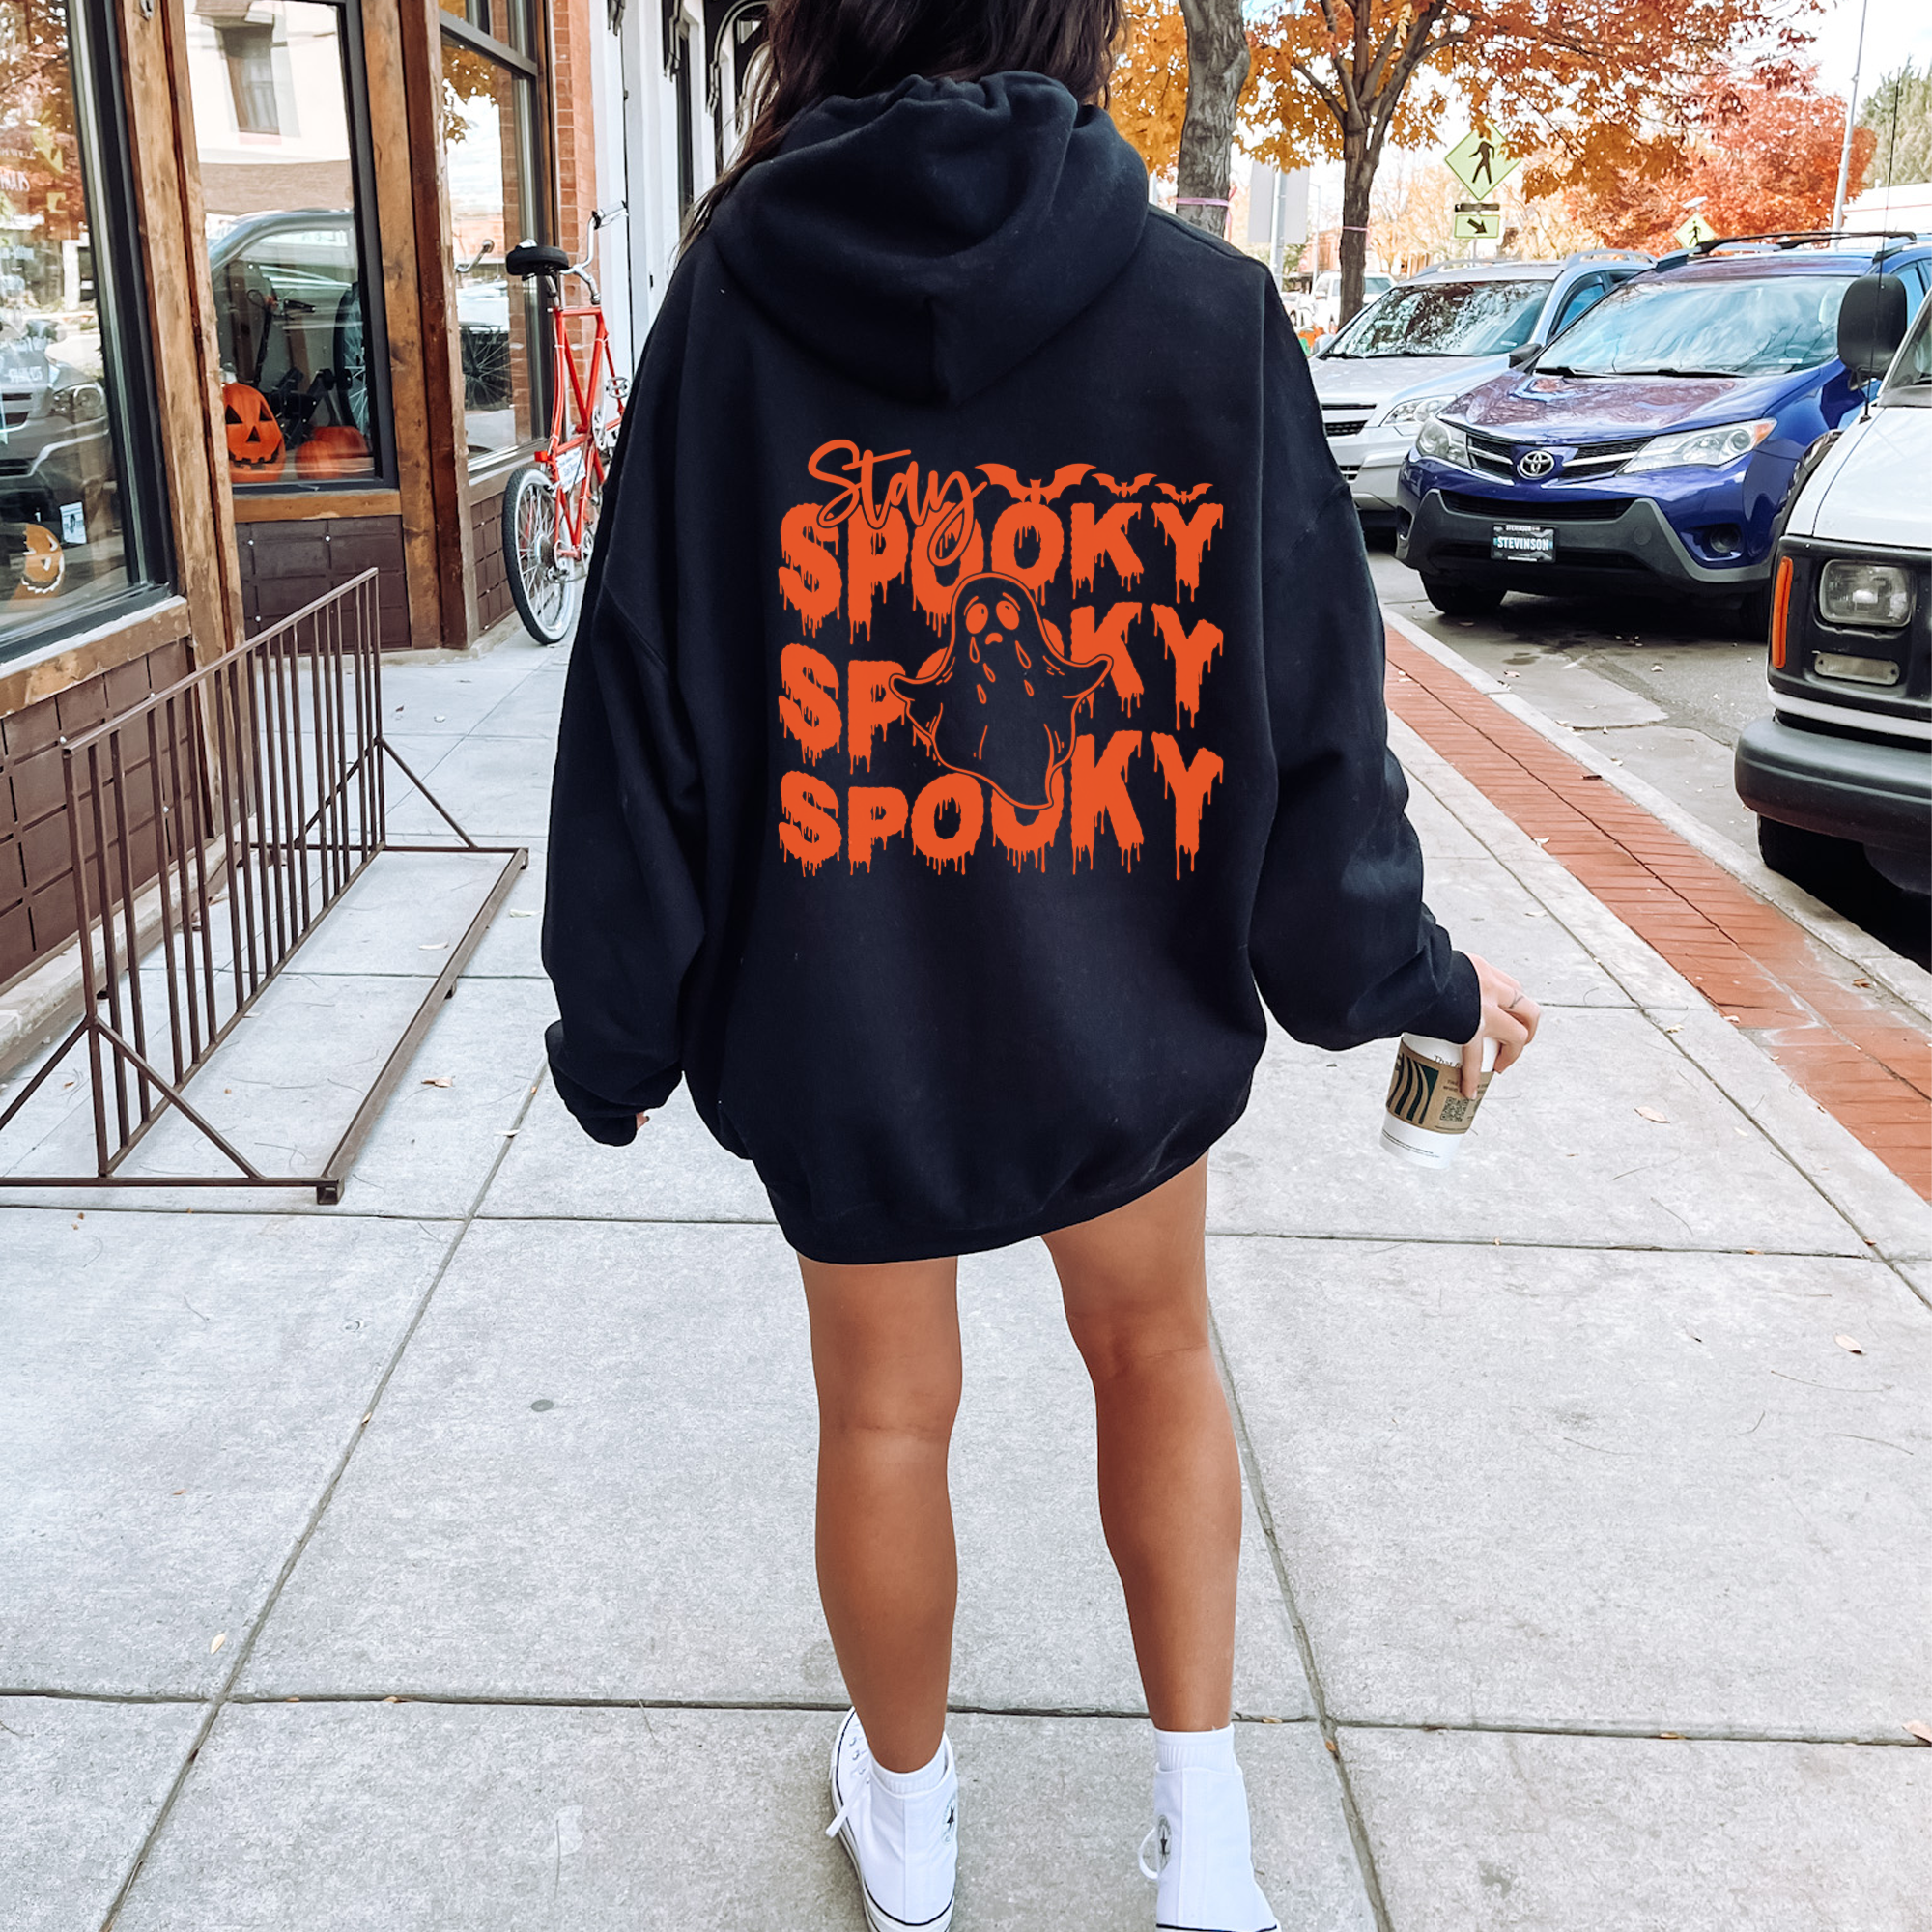 Stay Spooky - Halloween Hoodie - Sizes S to 5XL